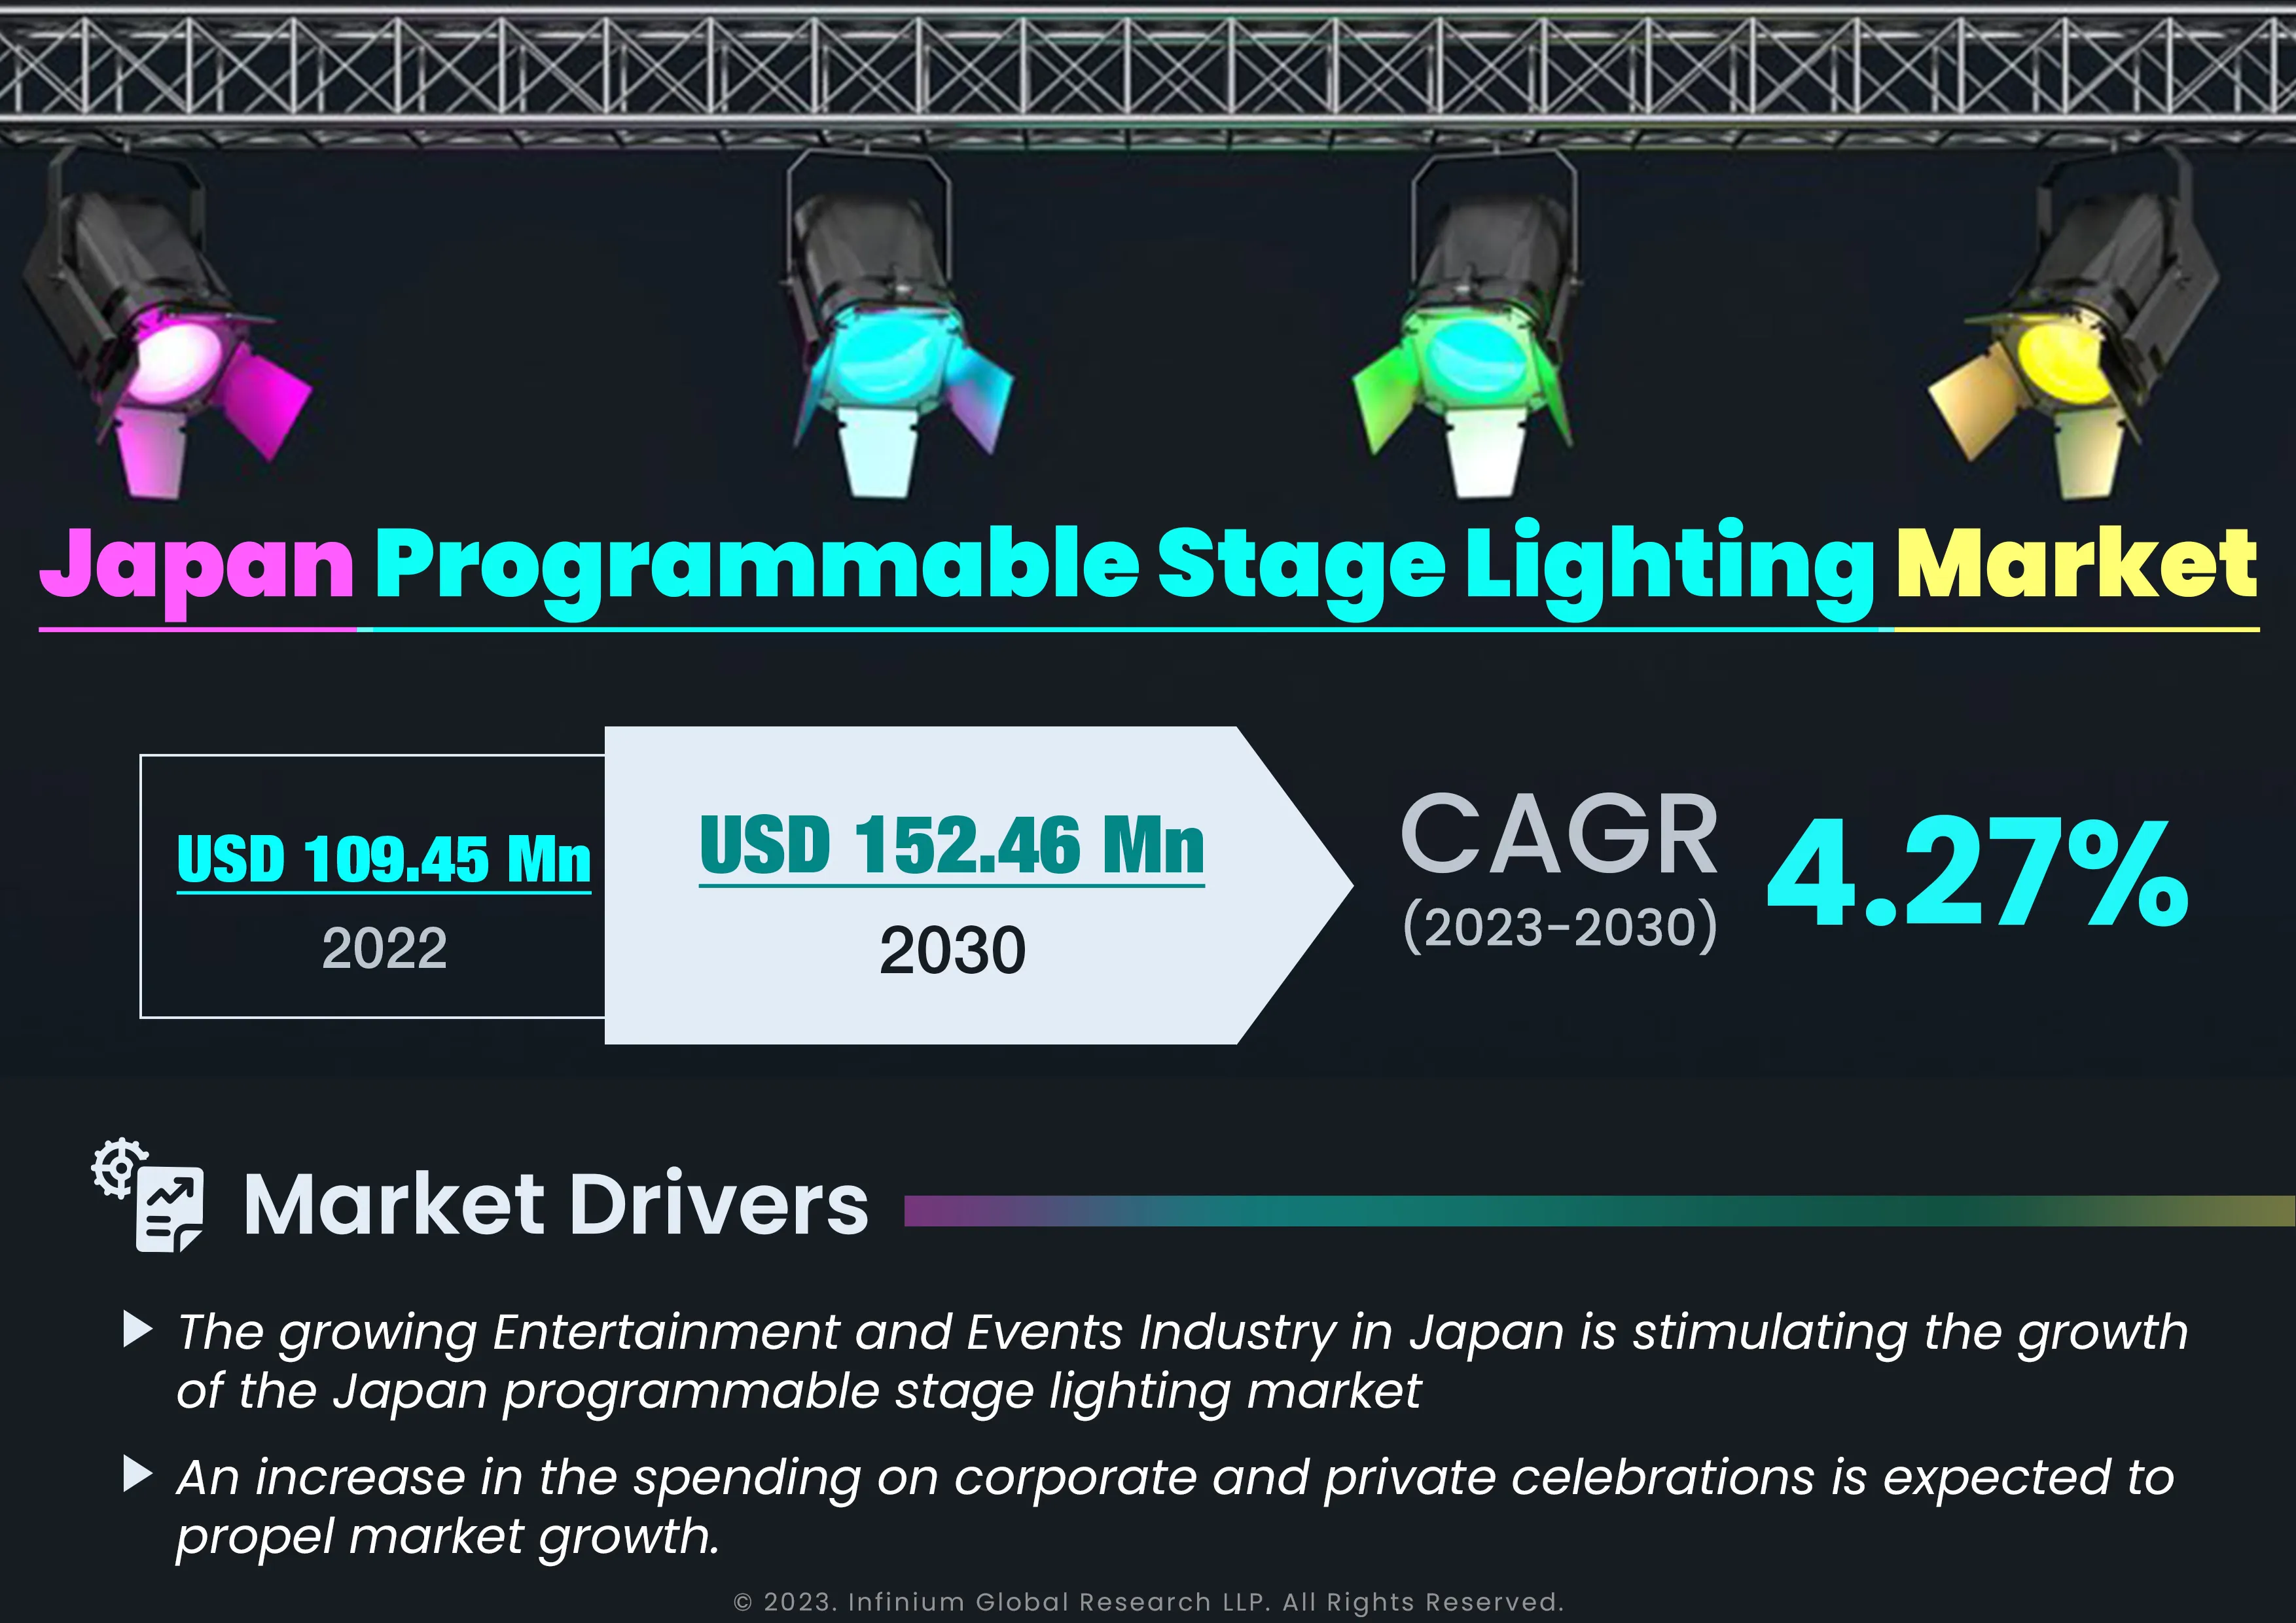 Japan Programmable Stage Lighting Market was Valued at USD 109.45 Million in 2022 and is Expected to Reach USD 152.46 Million by 2030 and Grow at a CAGR of 4.27% Over the Forecast Period.